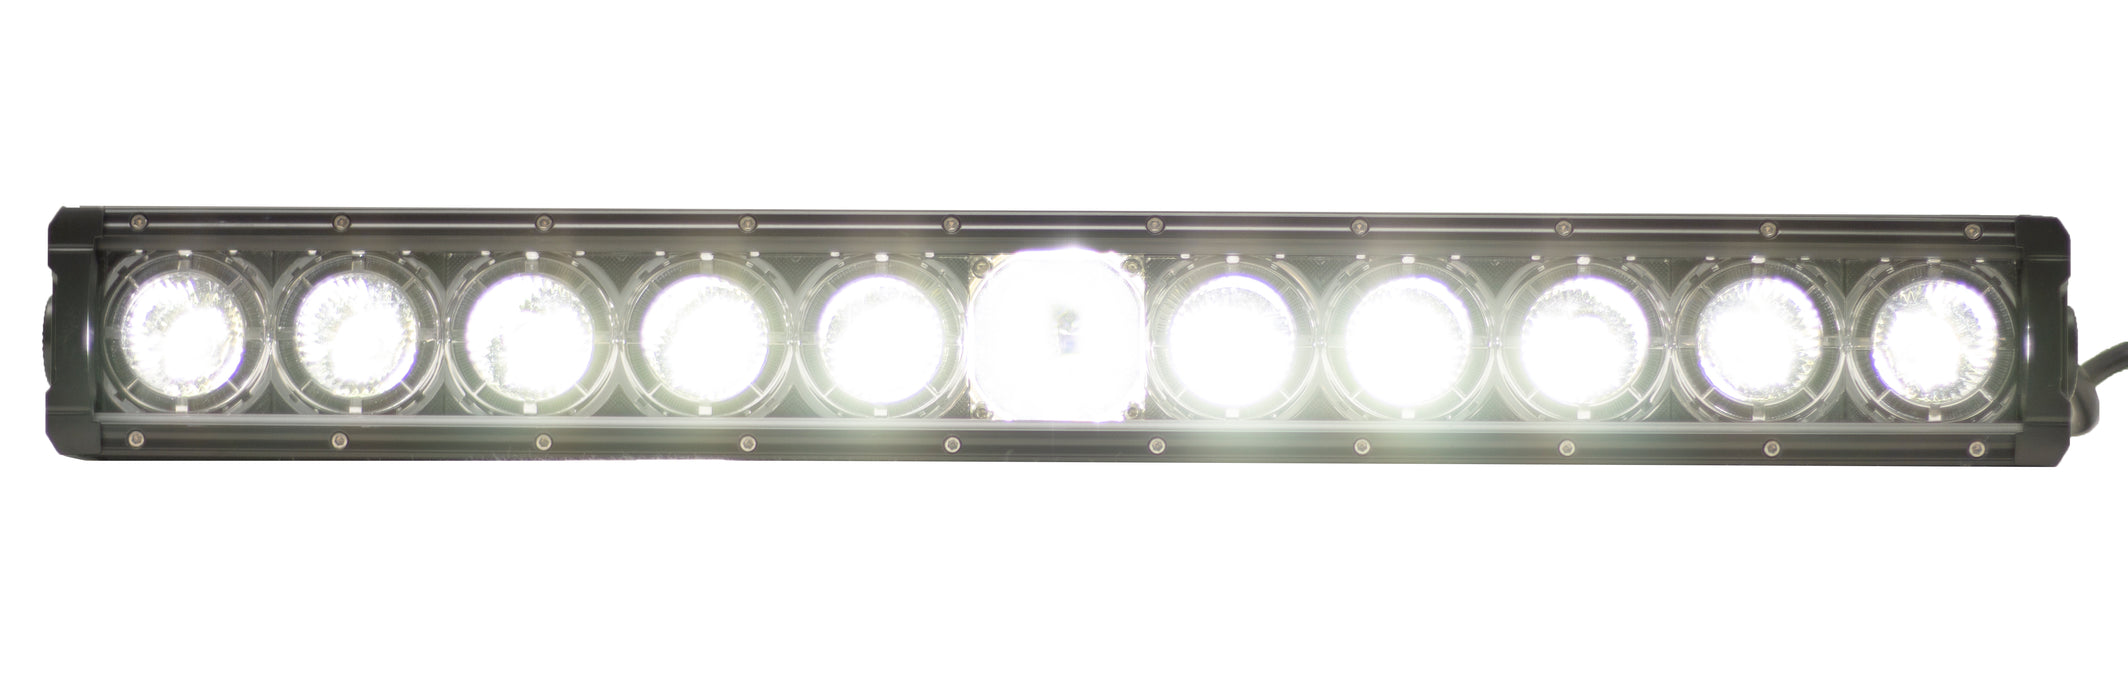 NEXTGEN- 22in LL Series LED & LASER Single Row High Performance Light Bar with 10-Watt Large Mouth Optical Diodes